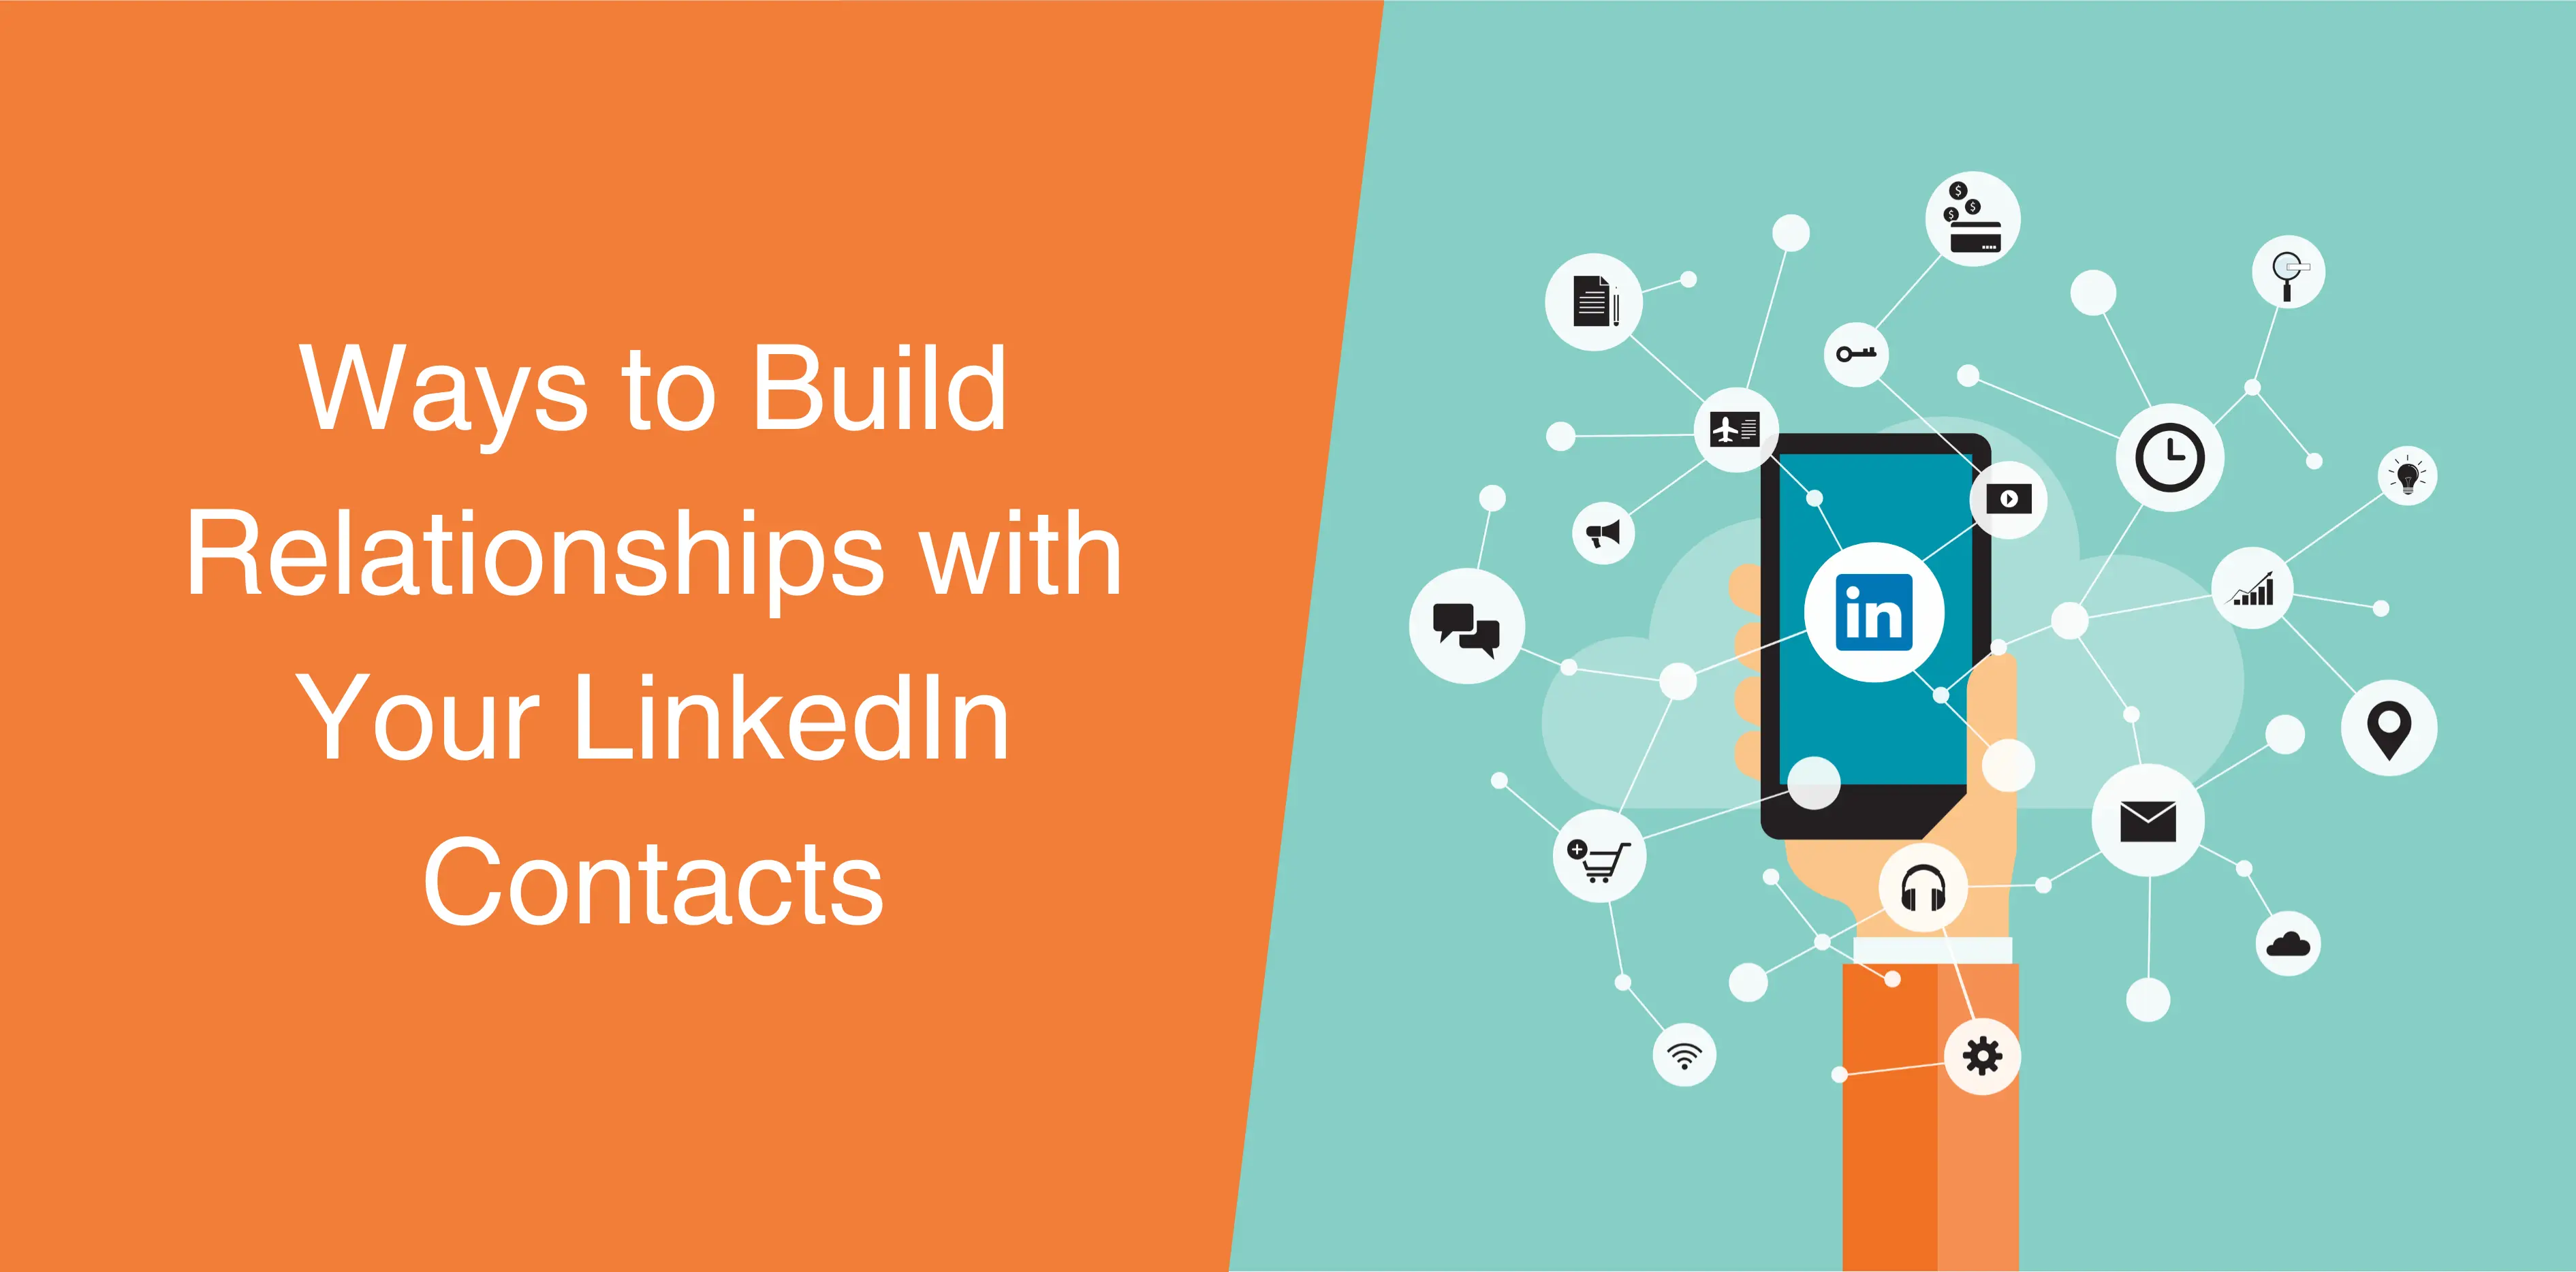 Ways to Build Relationships with Your LinkedIn Contacts